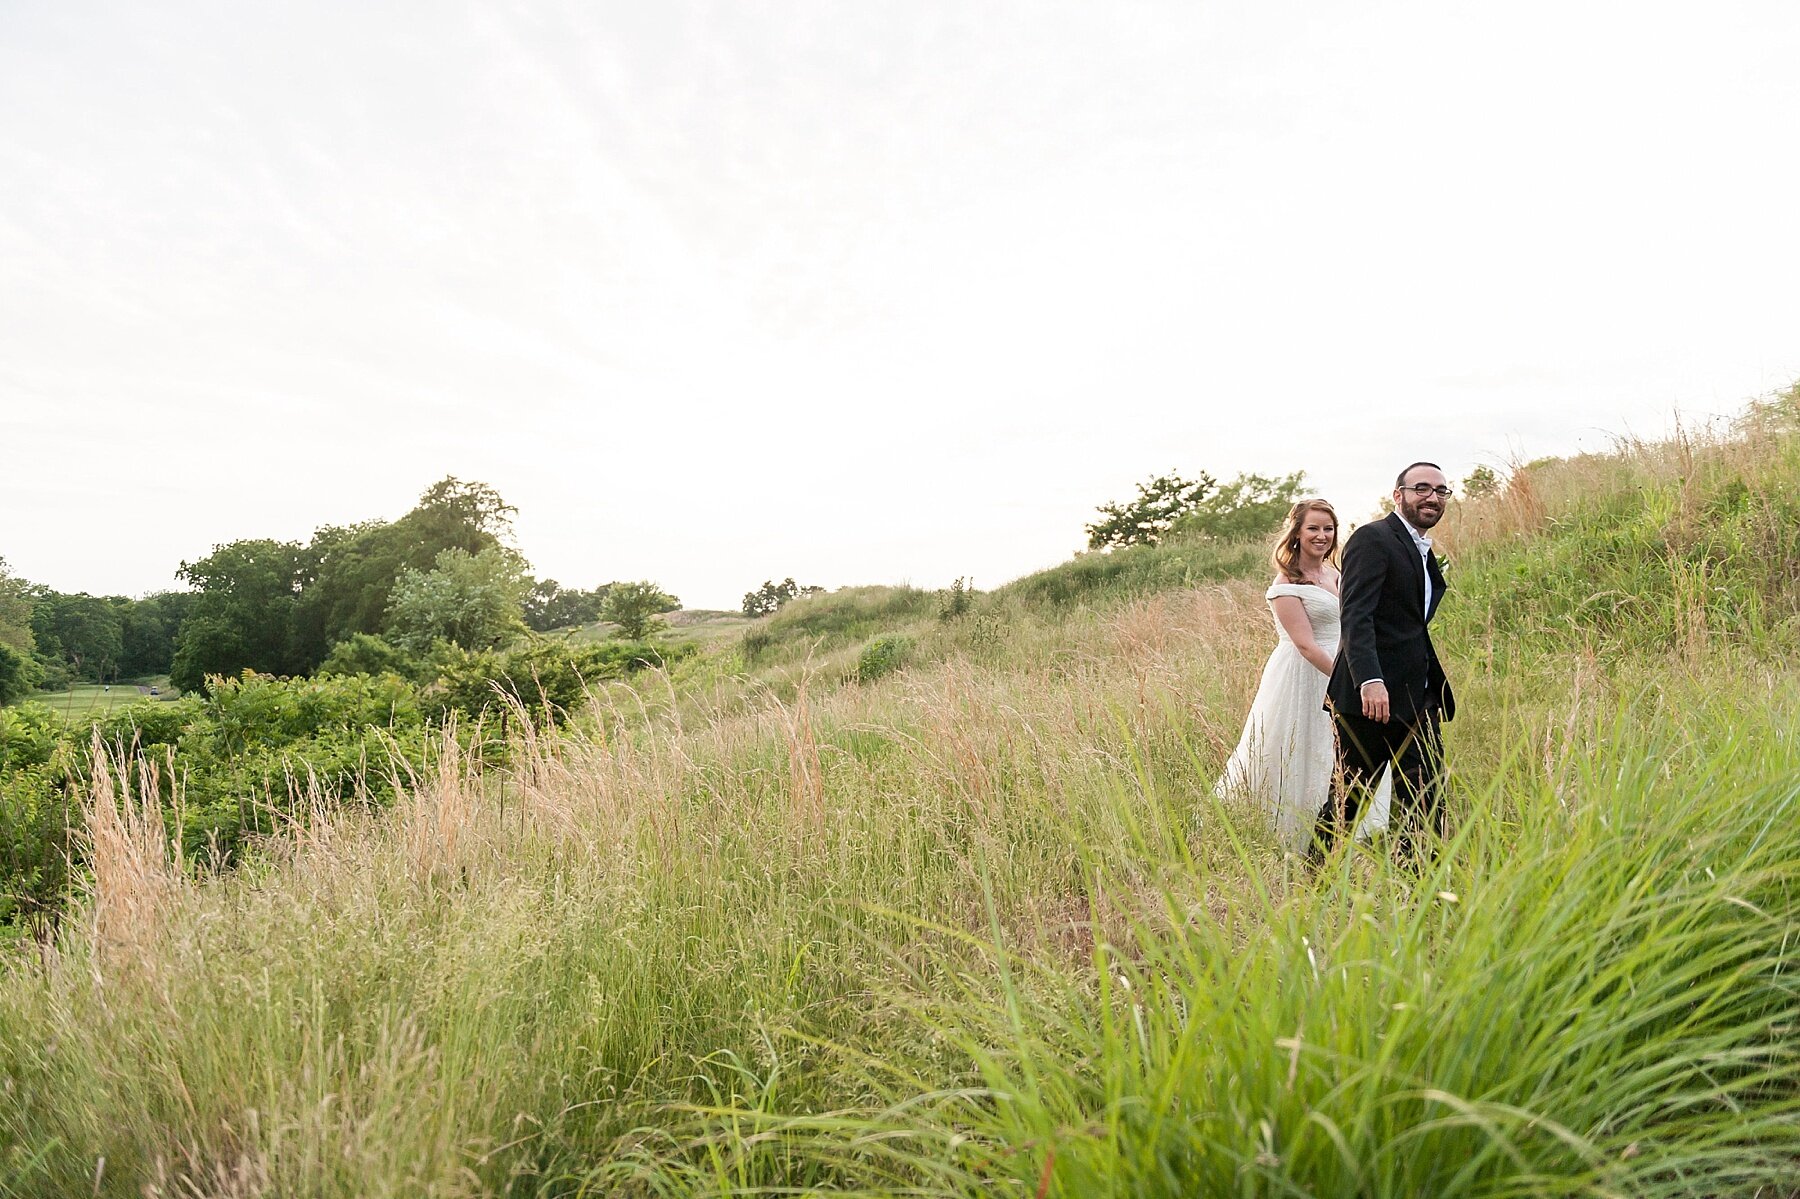 Wendy Zook Photography | Frederick MD wedding photographer, Maryland wedding photographer, wedding photography, tips to plan a better honeymoon, wedding planning tips, guest blog by Heather McKay